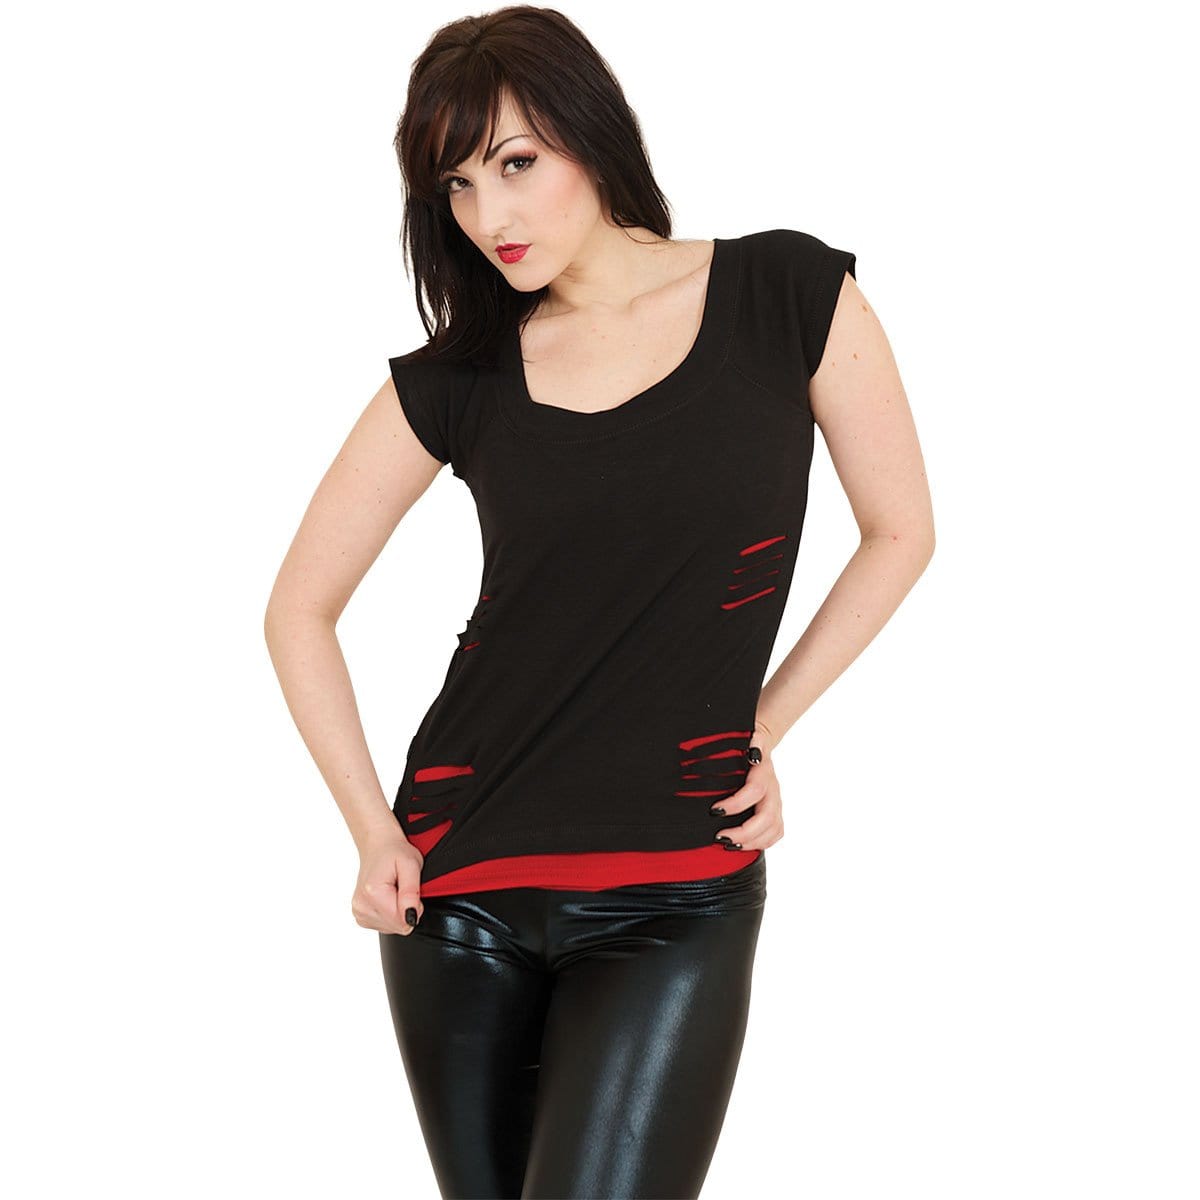 URBAN FASHION - 2in1 Red Ripped Top Black - Spiral USA